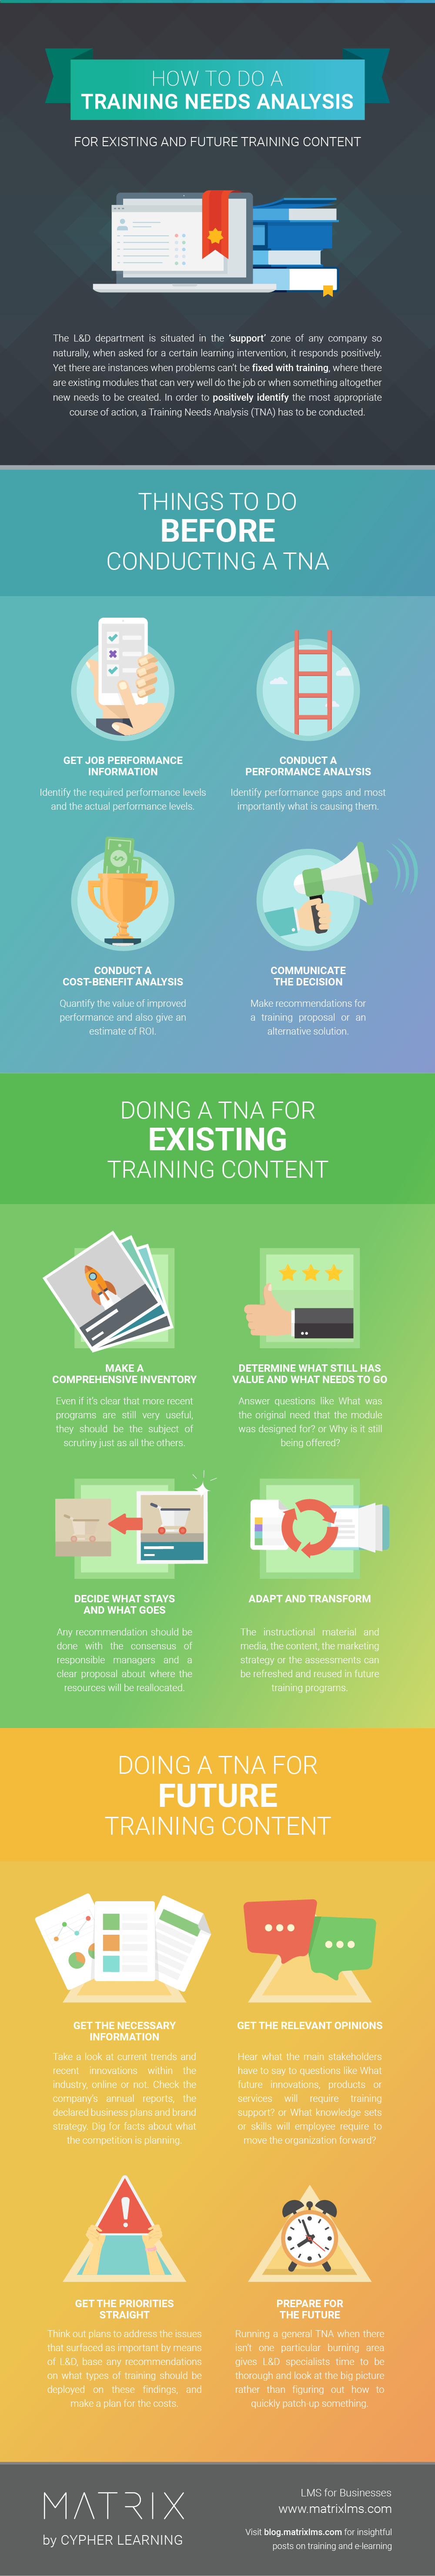 How to do a training needs analysis [INFOGRAPHIC]